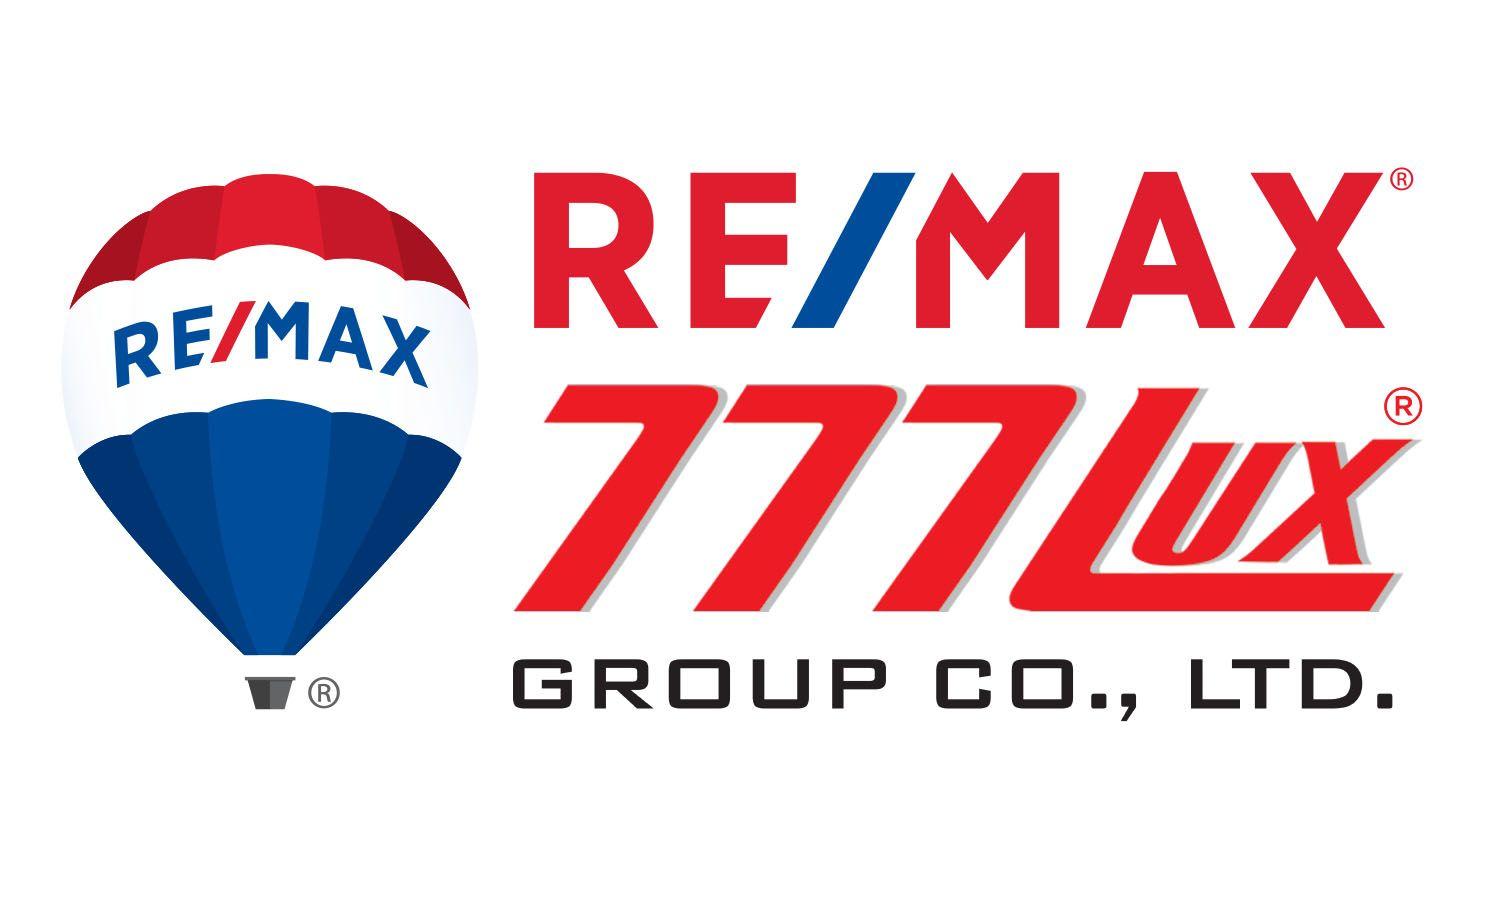 Remax.com Logo - Our Offices